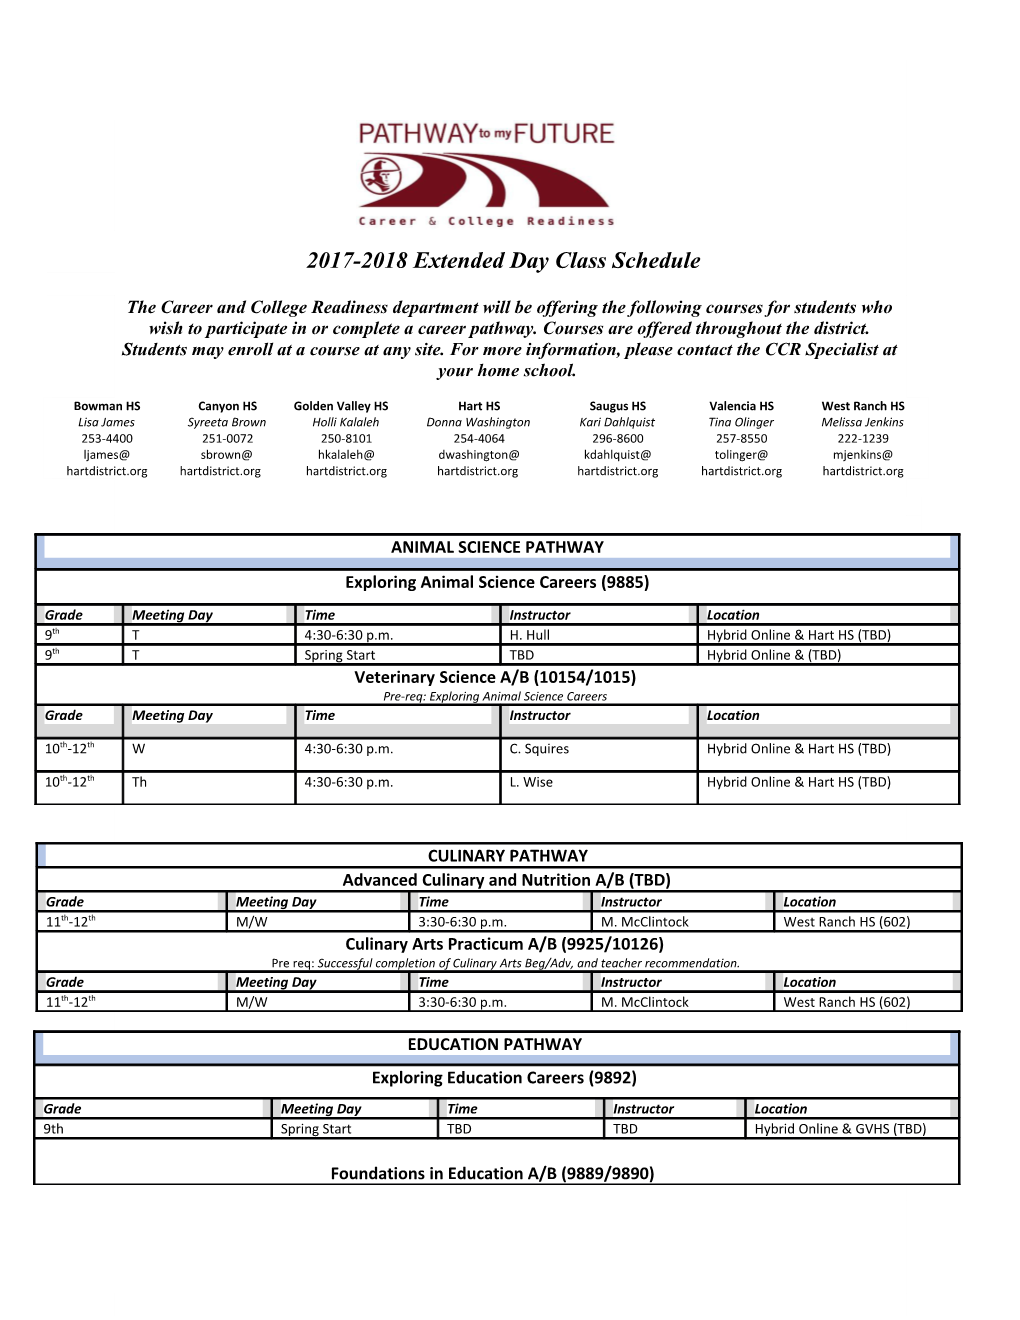 The Career and College Readiness Department Will Be Offering the Following Courses For